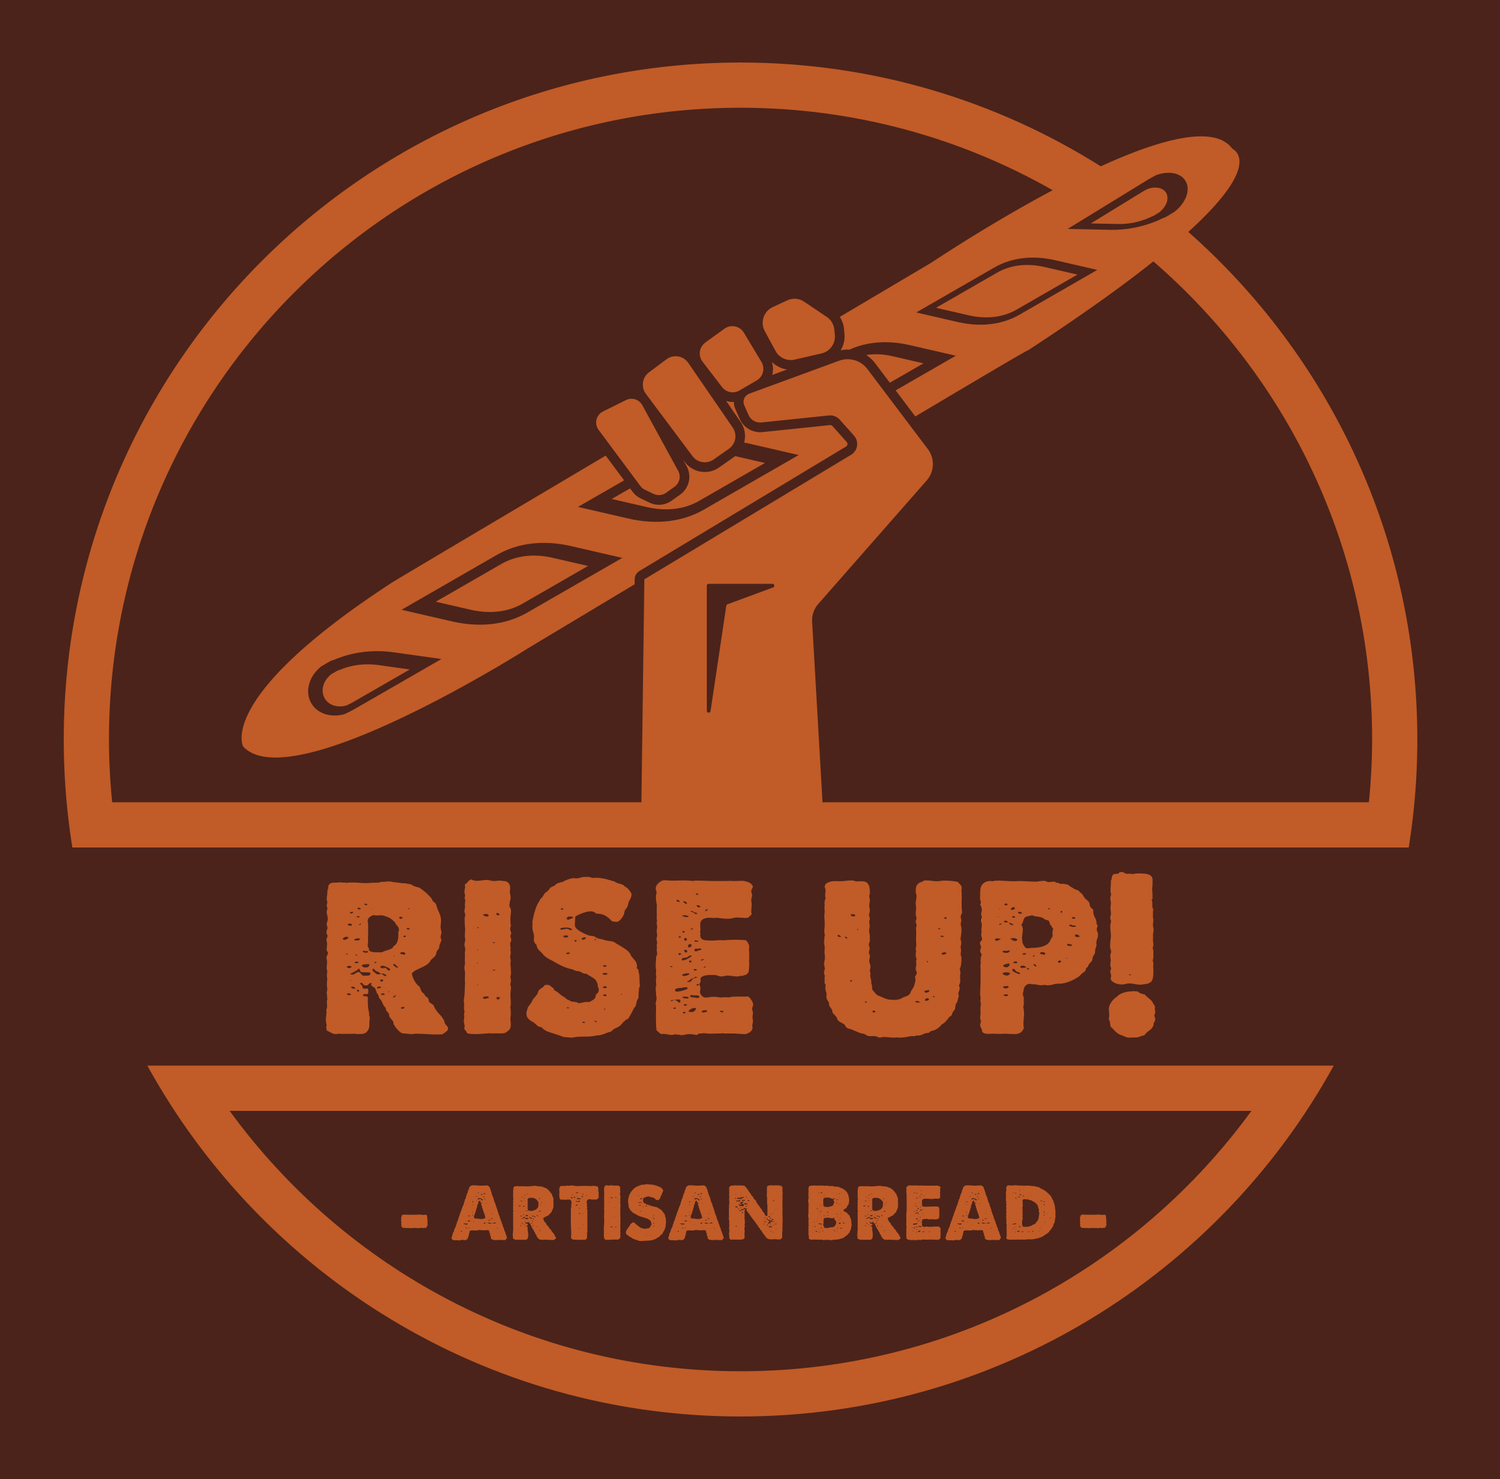 Rise Up! Artisan Breads